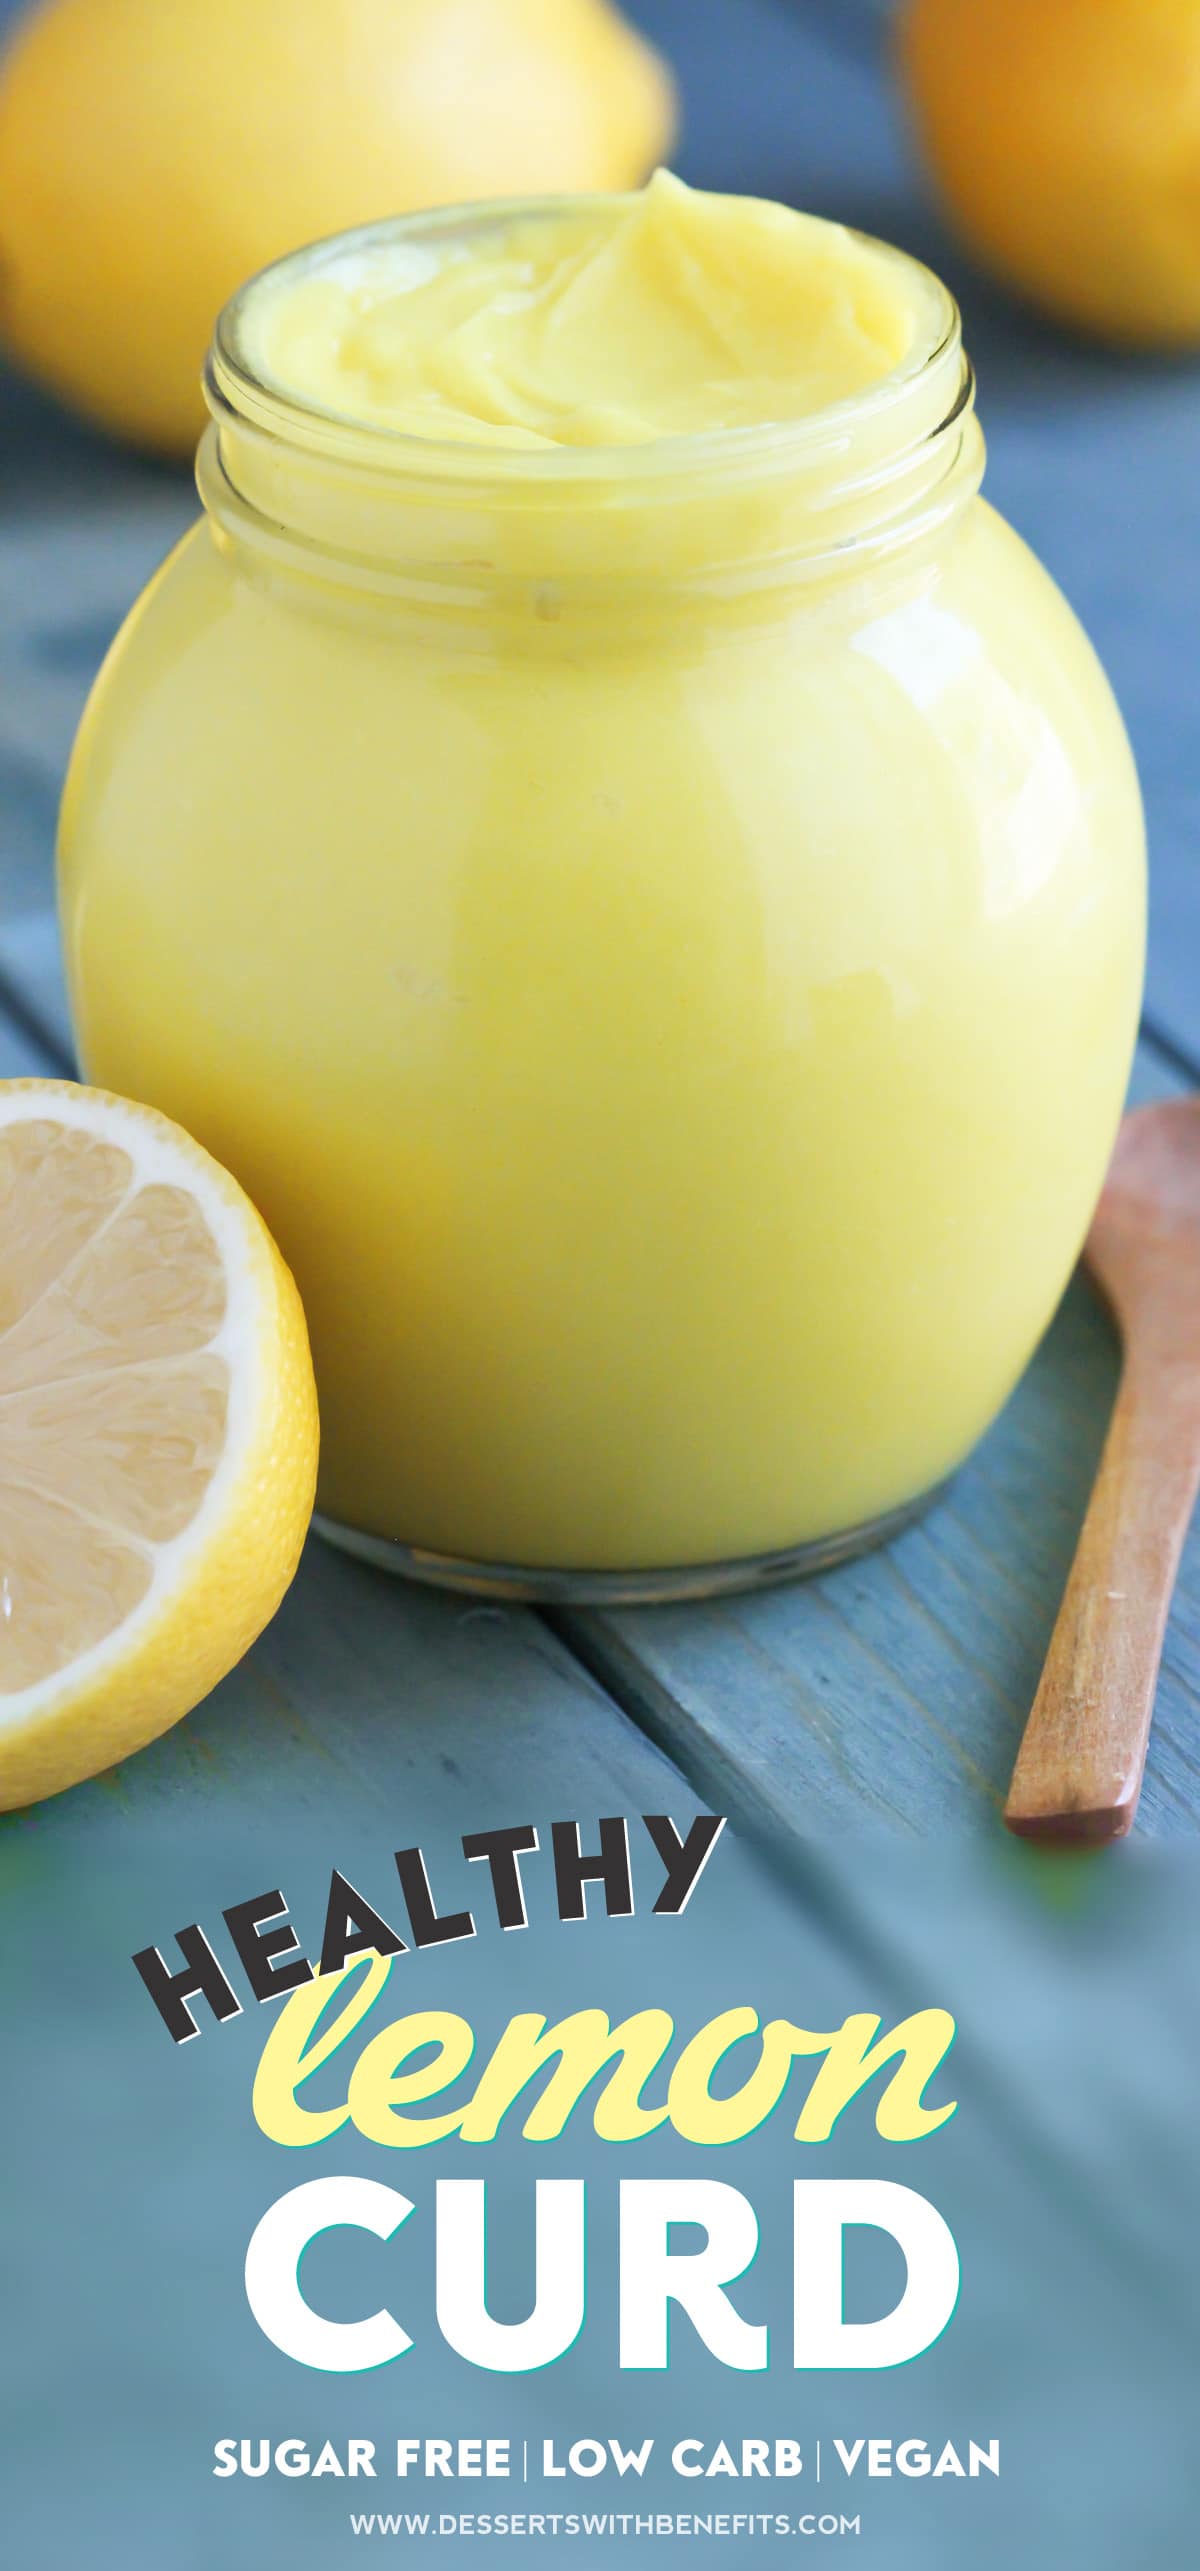 This Healthy Vegan Lemon Curd Recipe is creamy, sweet, tart, and delicious. You'd never know it's sugar free, low carb, gluten free, dairy free, and vegan! Healthy Dessert Recipes at Desserts with Benefits